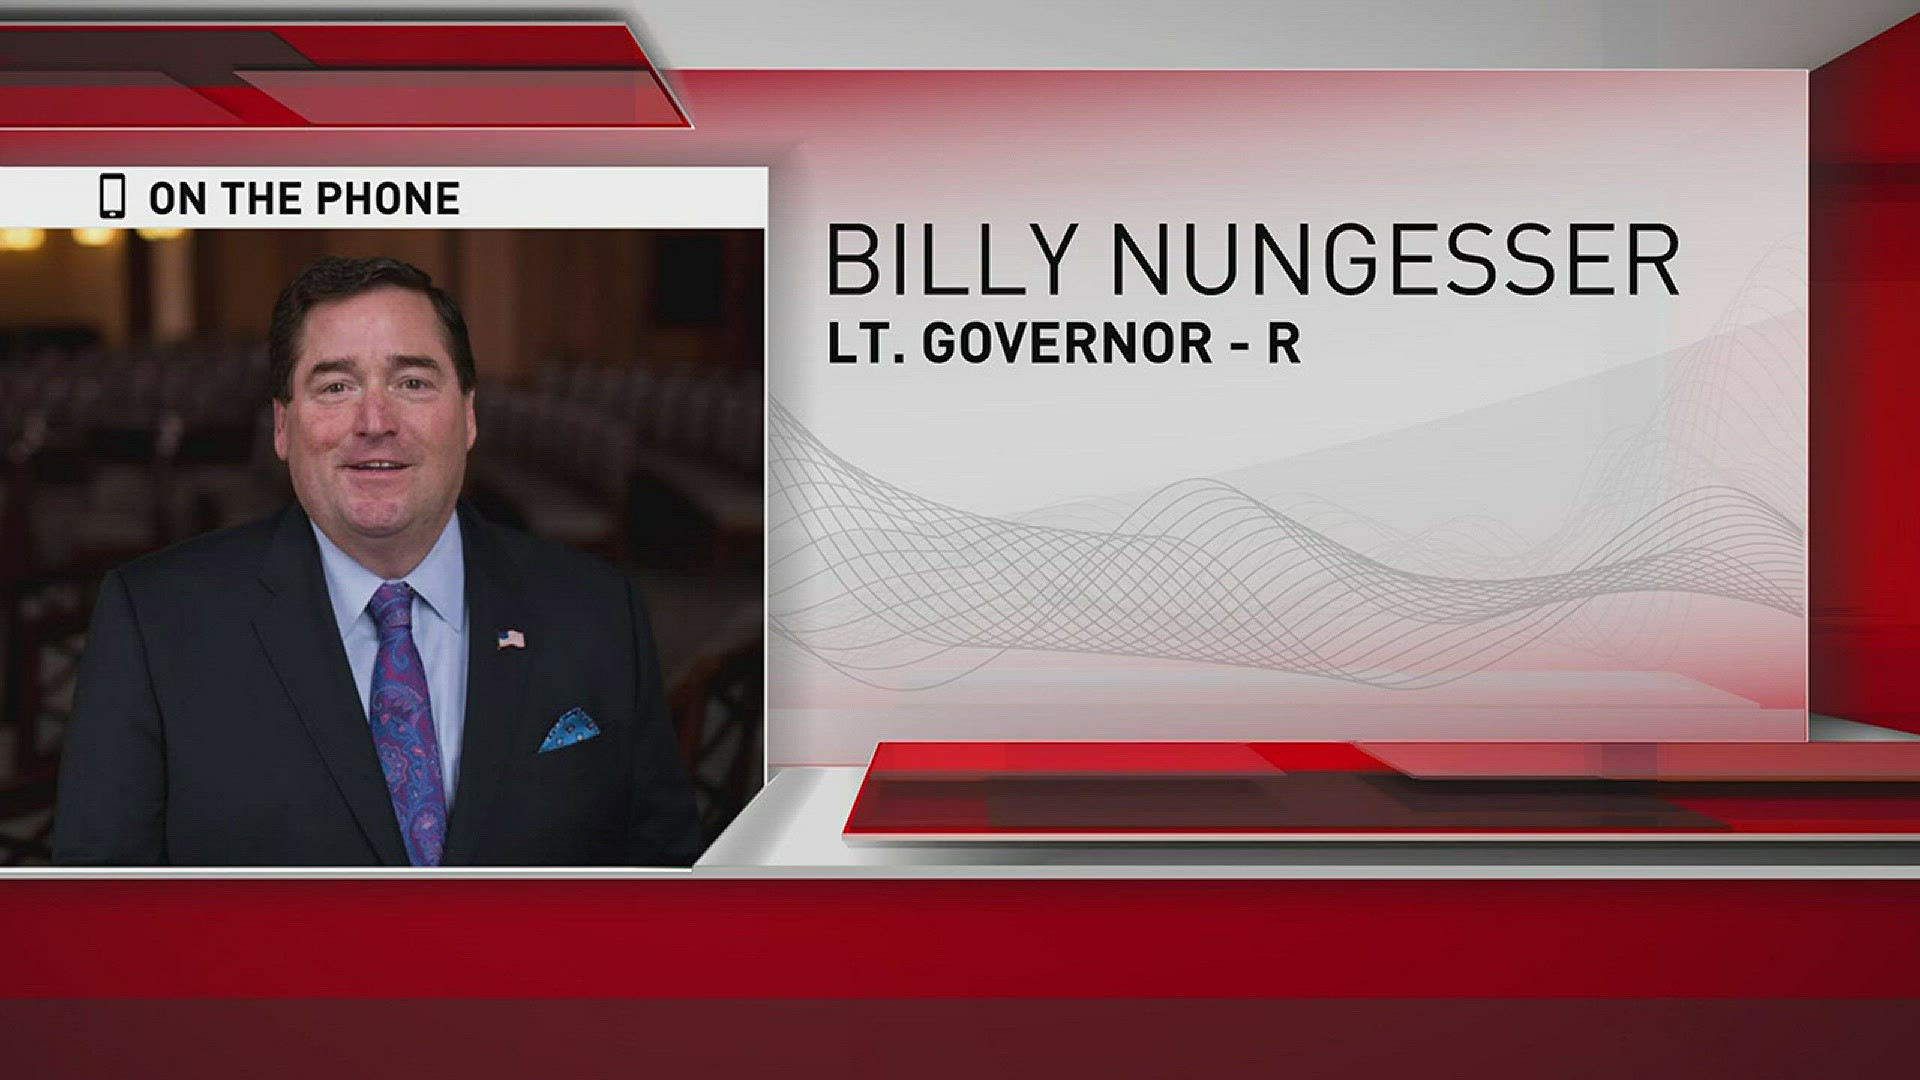 Saying he is disgusted by the decision of some Saints players to take a knee during the National Anthem, Lieutenant Governor Billy Nungesser, who is in London to attend the game, now says he will not be there.